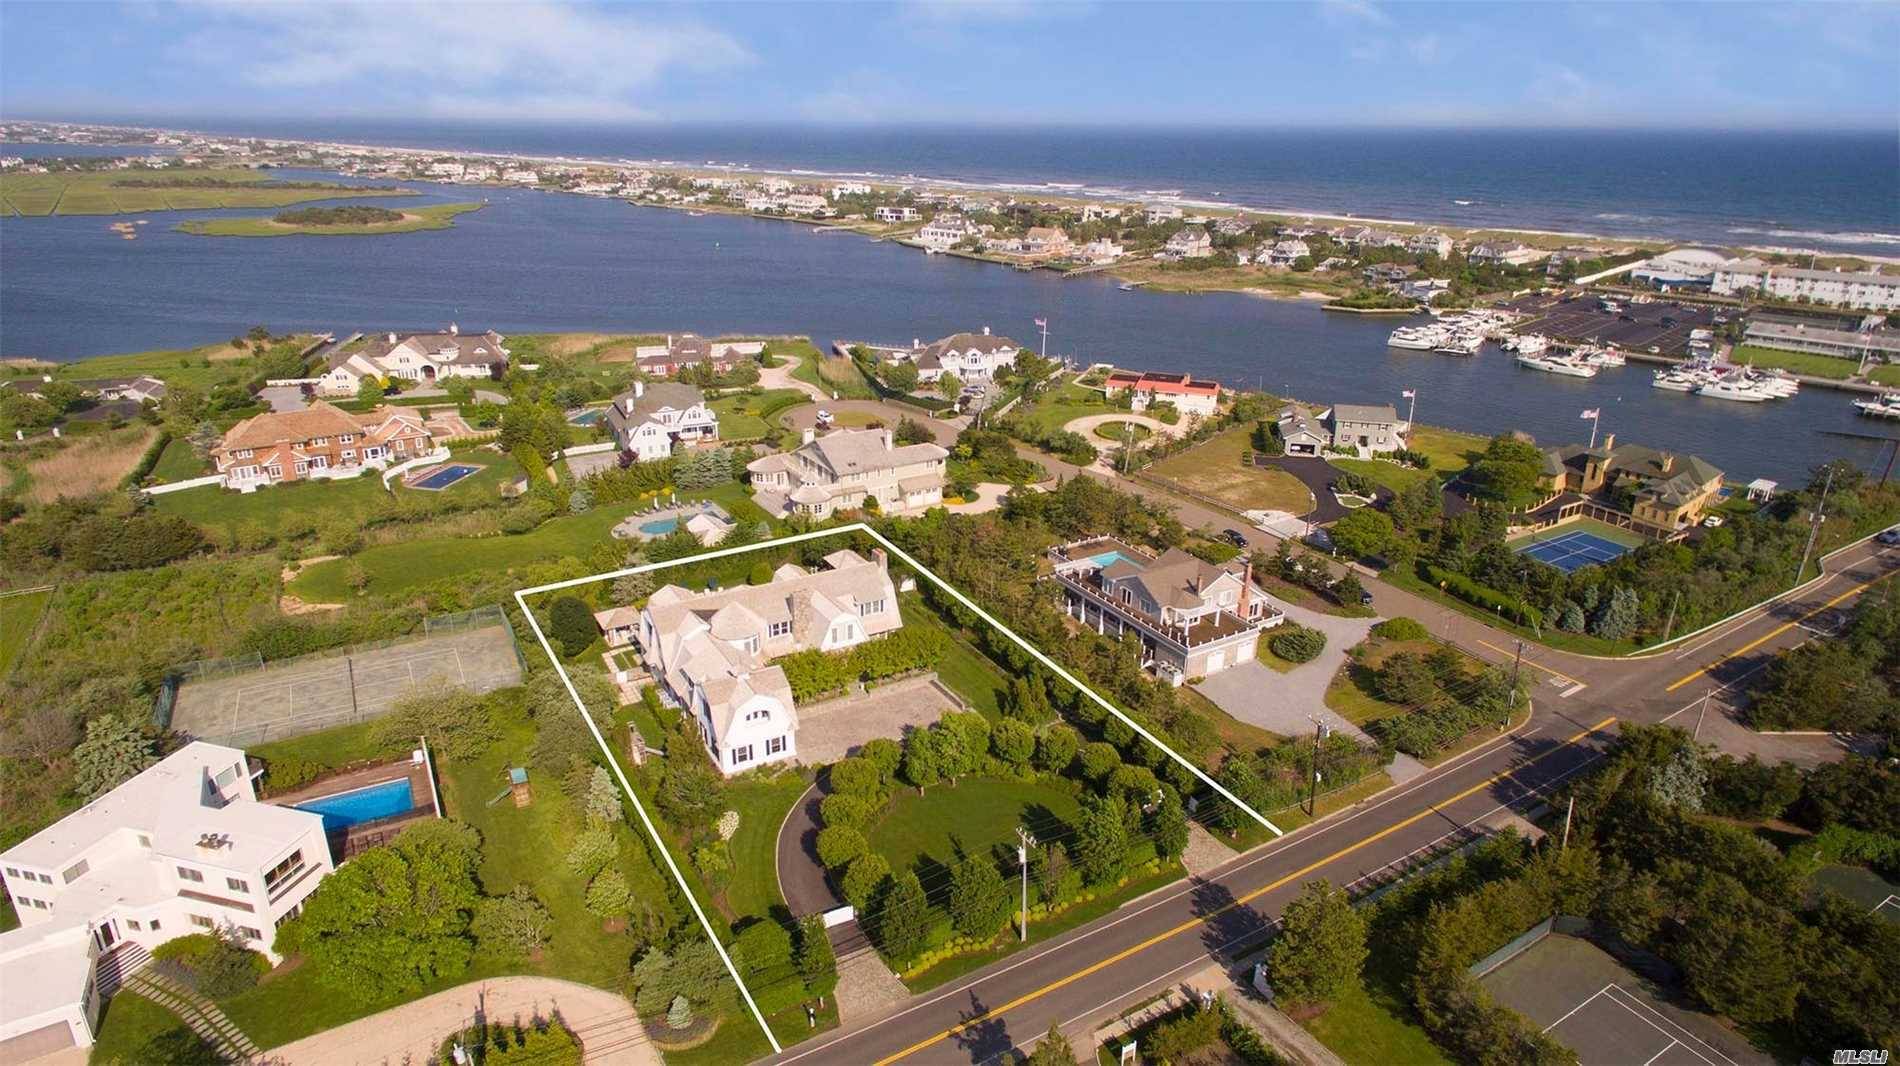 This 9,000 Sf+/+ Custom Home Is Located In The Heart Of The Westhampton Beach, In Immediate Proximity To Village Shopping, Dining And Ocean Beaches.